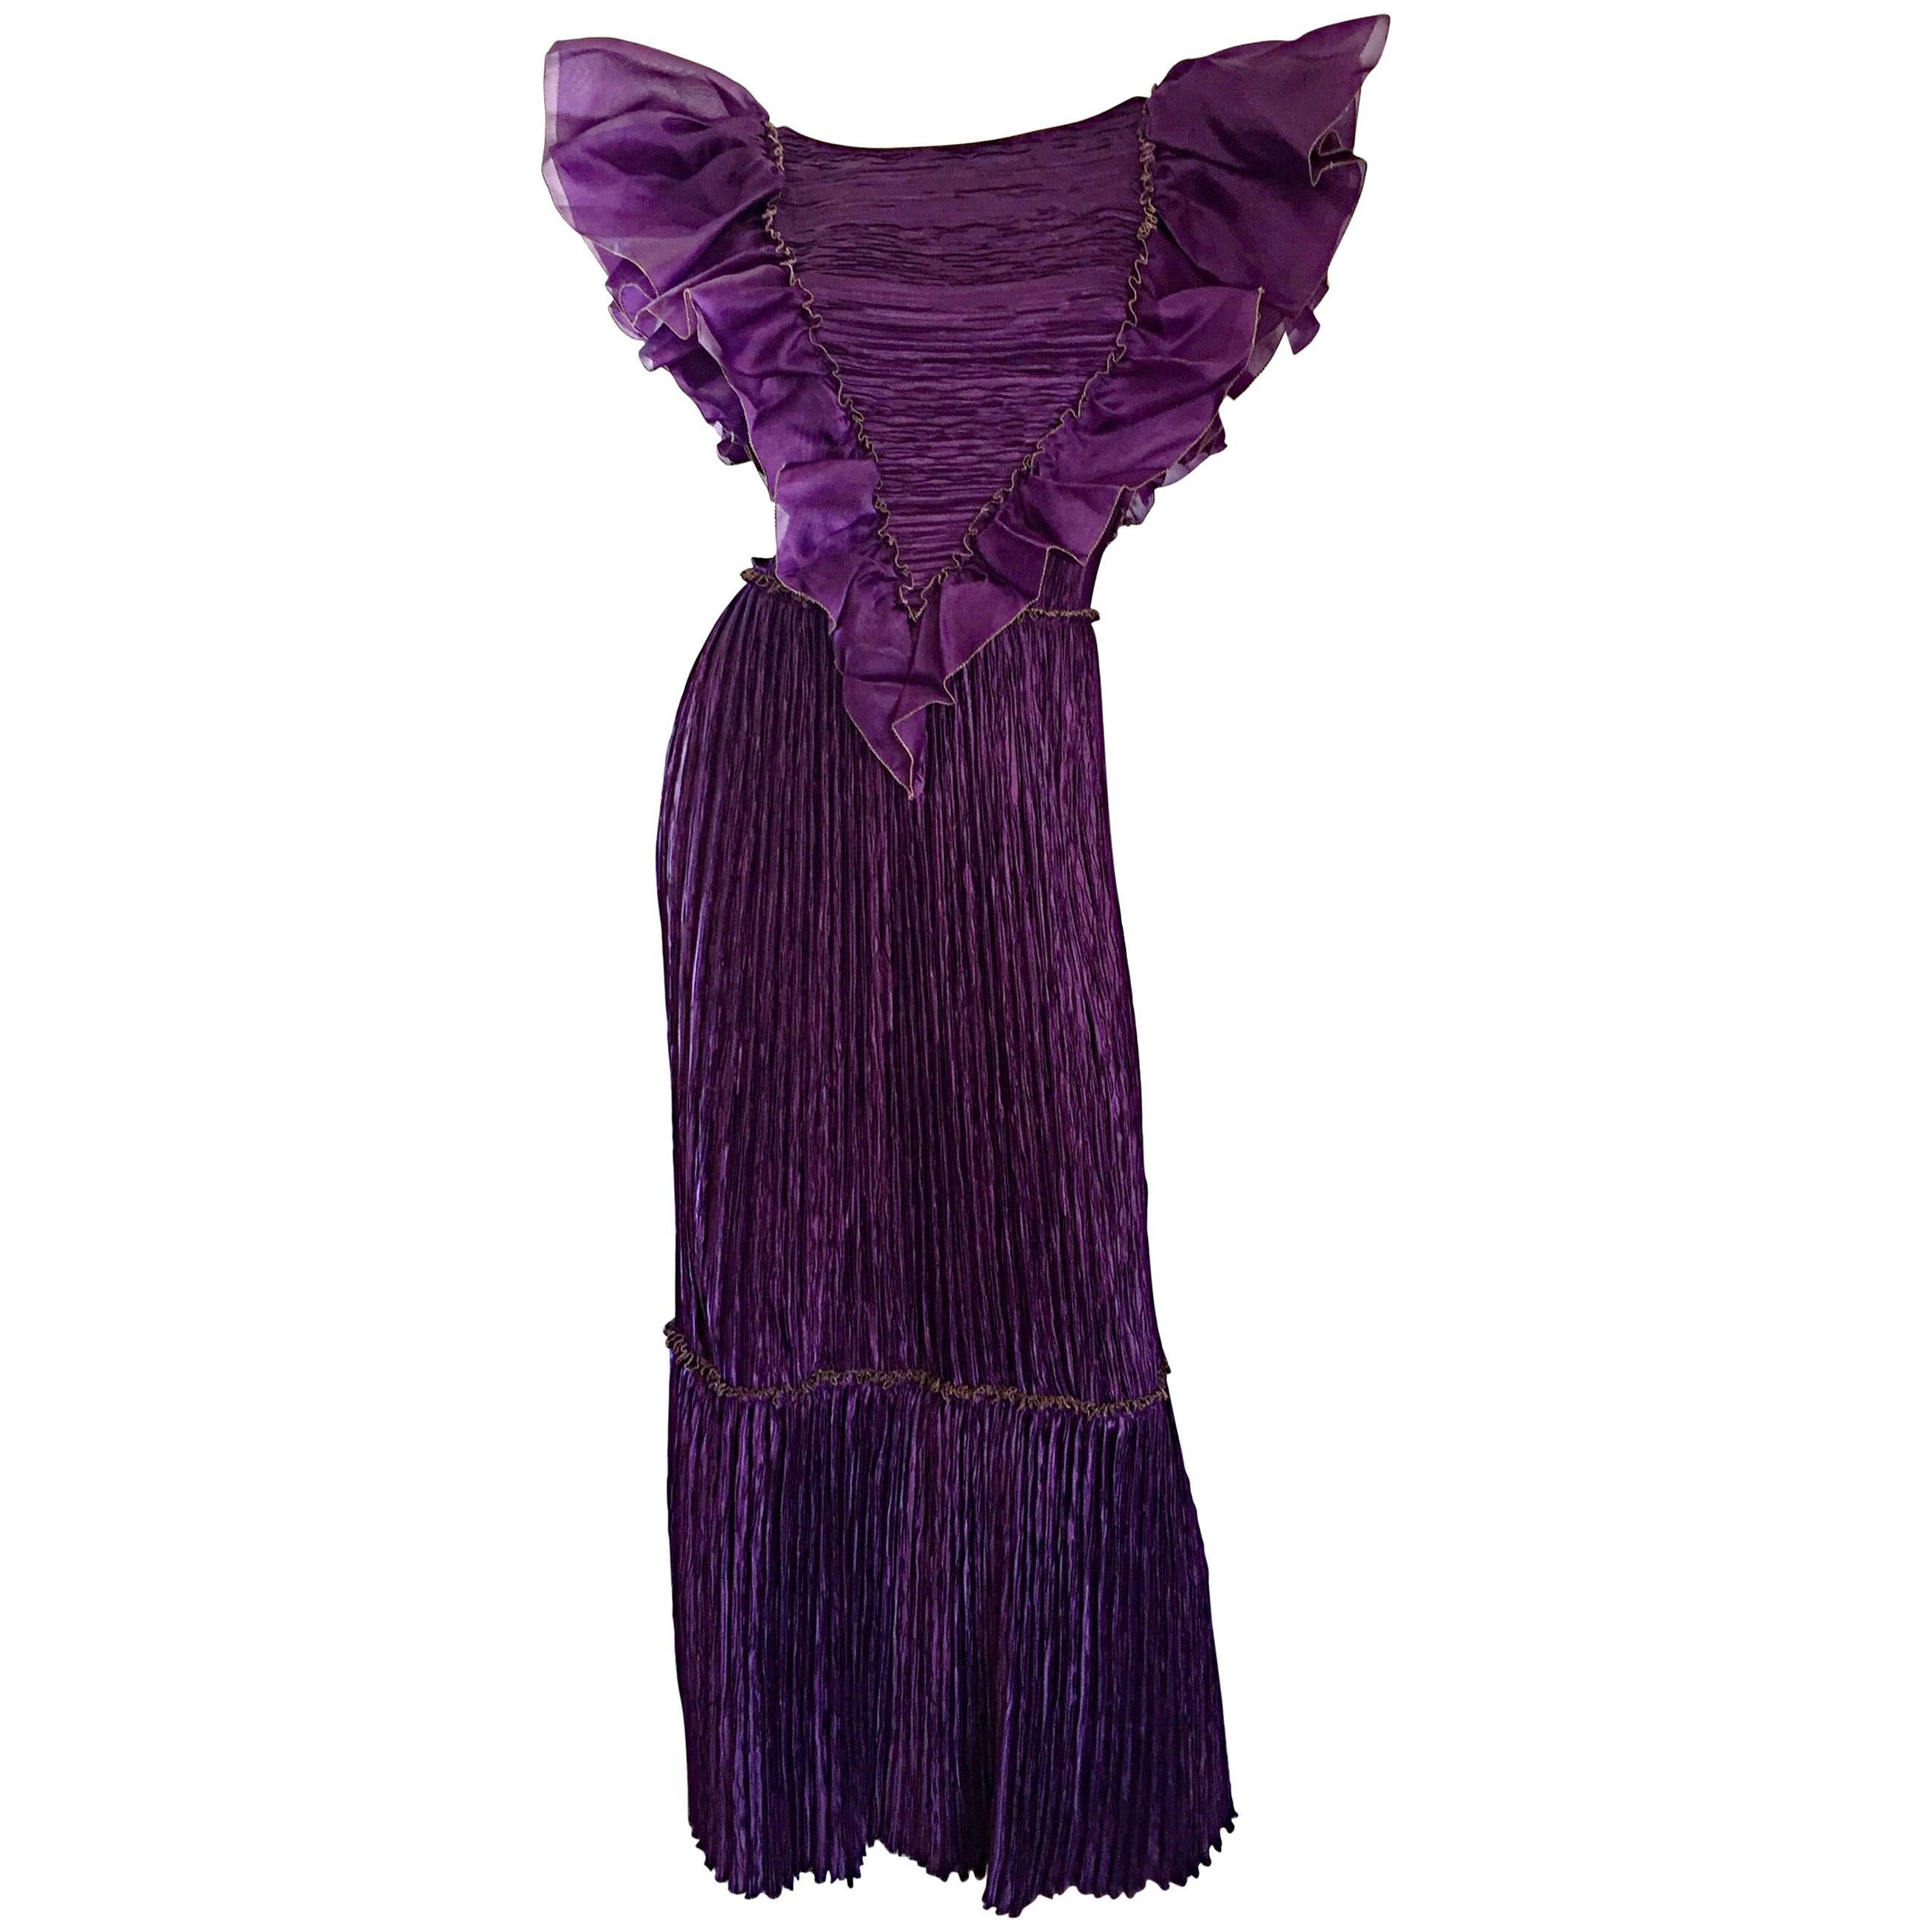 Mary McFadden Couture for Bonwit Teller 80s Purple Fortuny Pleated Ruffle Dress